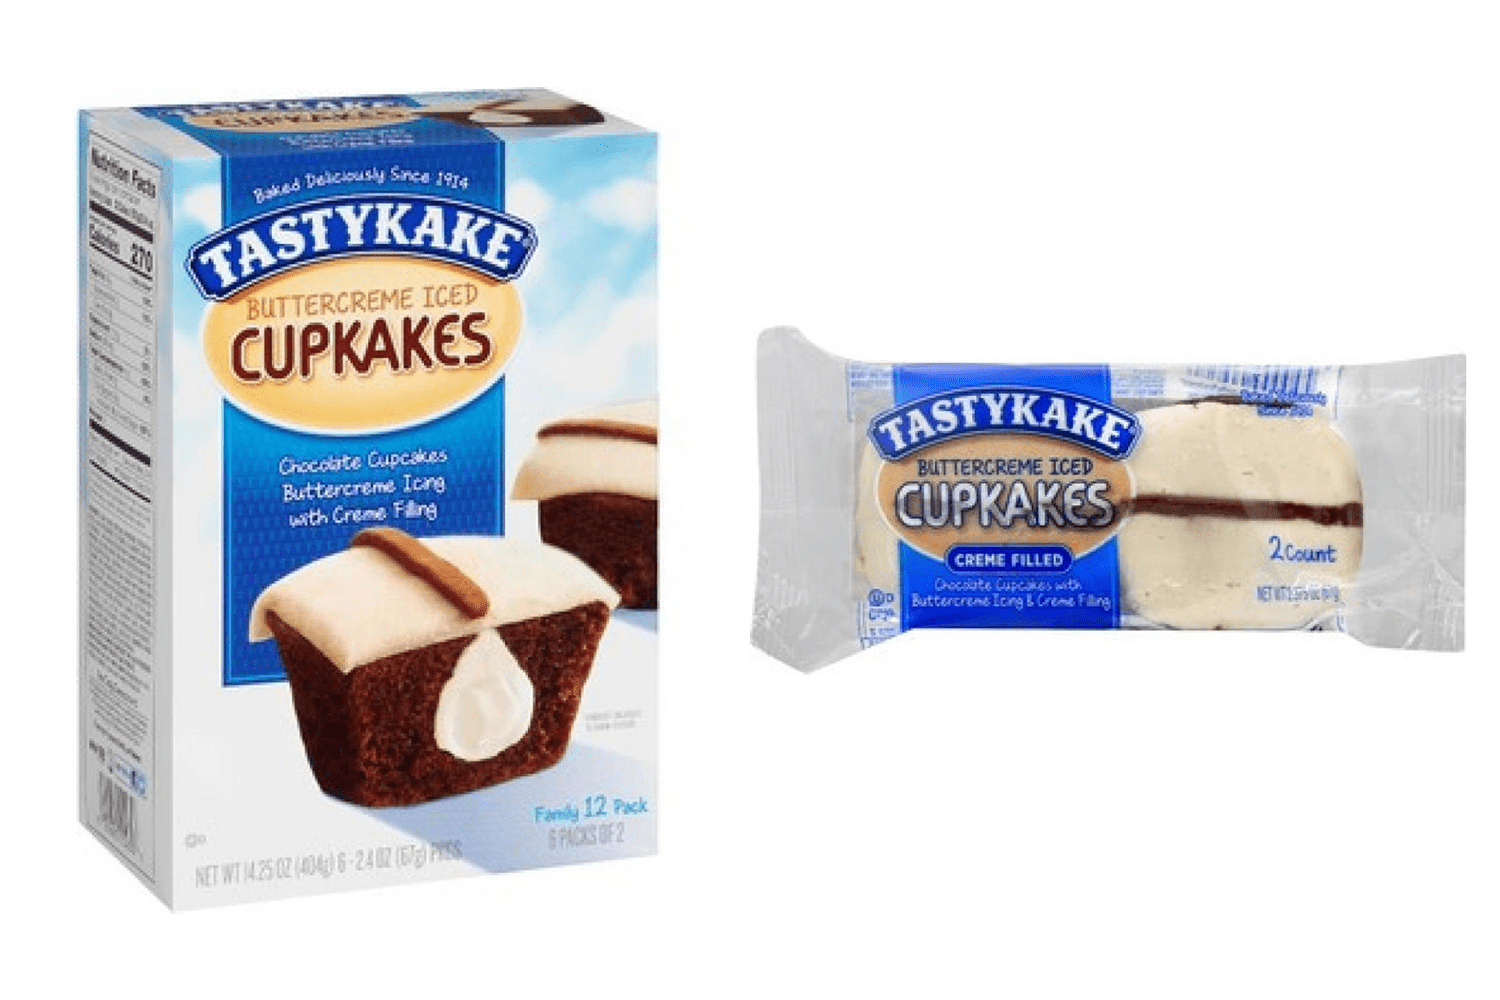 A box of Tastykake cupcakes and a plastic bag of cupcakes side by side on a white background